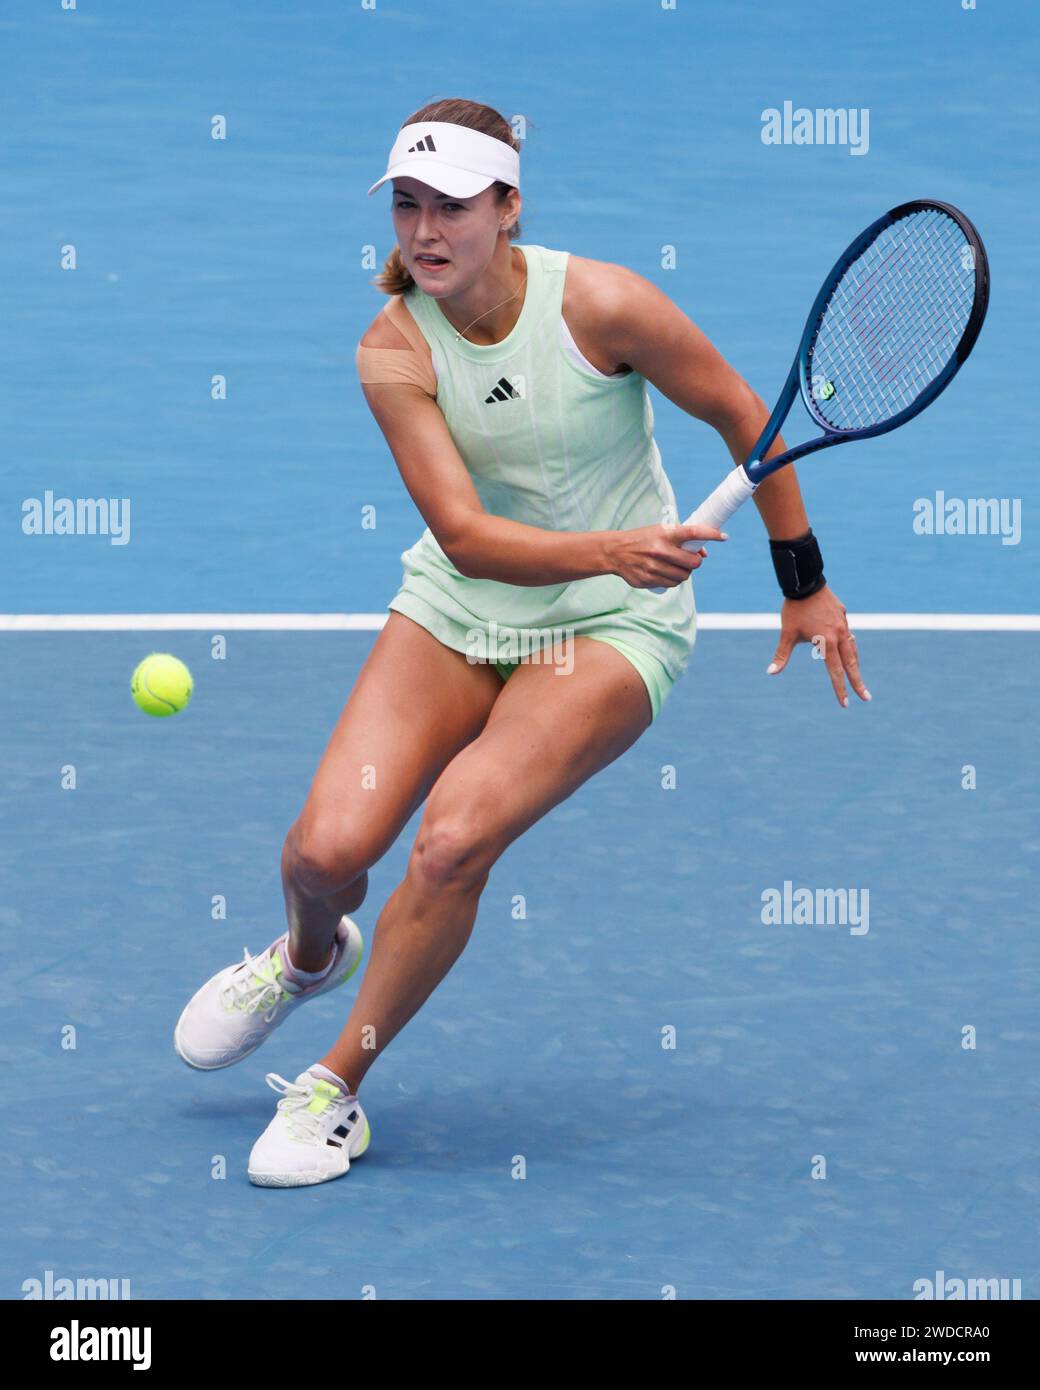 Melbourne, Australia. 20th Jan, 2024. ANNA KALINSKAYA of the Russian Federation in action against SLOANE STEPHENS of the USA on KIA Arena in a Women's Singles 3rd round match on day 7 of the 2024 Australian Open in Melbourne, Australia. Sydney Low/Cal Sport Media/Alamy Live News Stock Photo